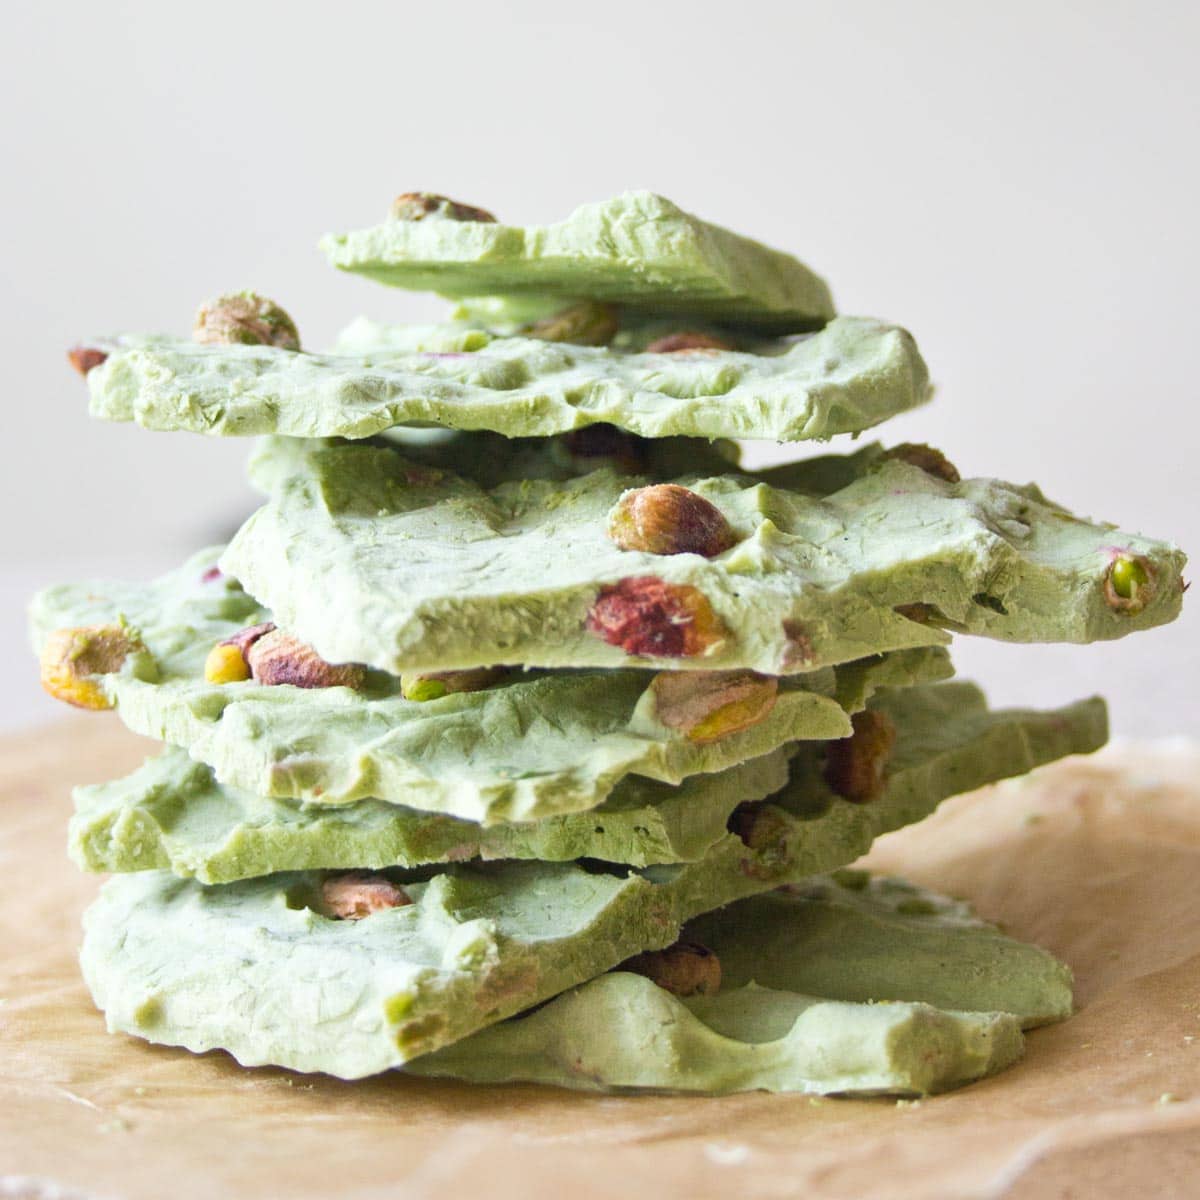 Matcha Frozen Yogurt Bark stacked on top of each other. About 10 pieces.